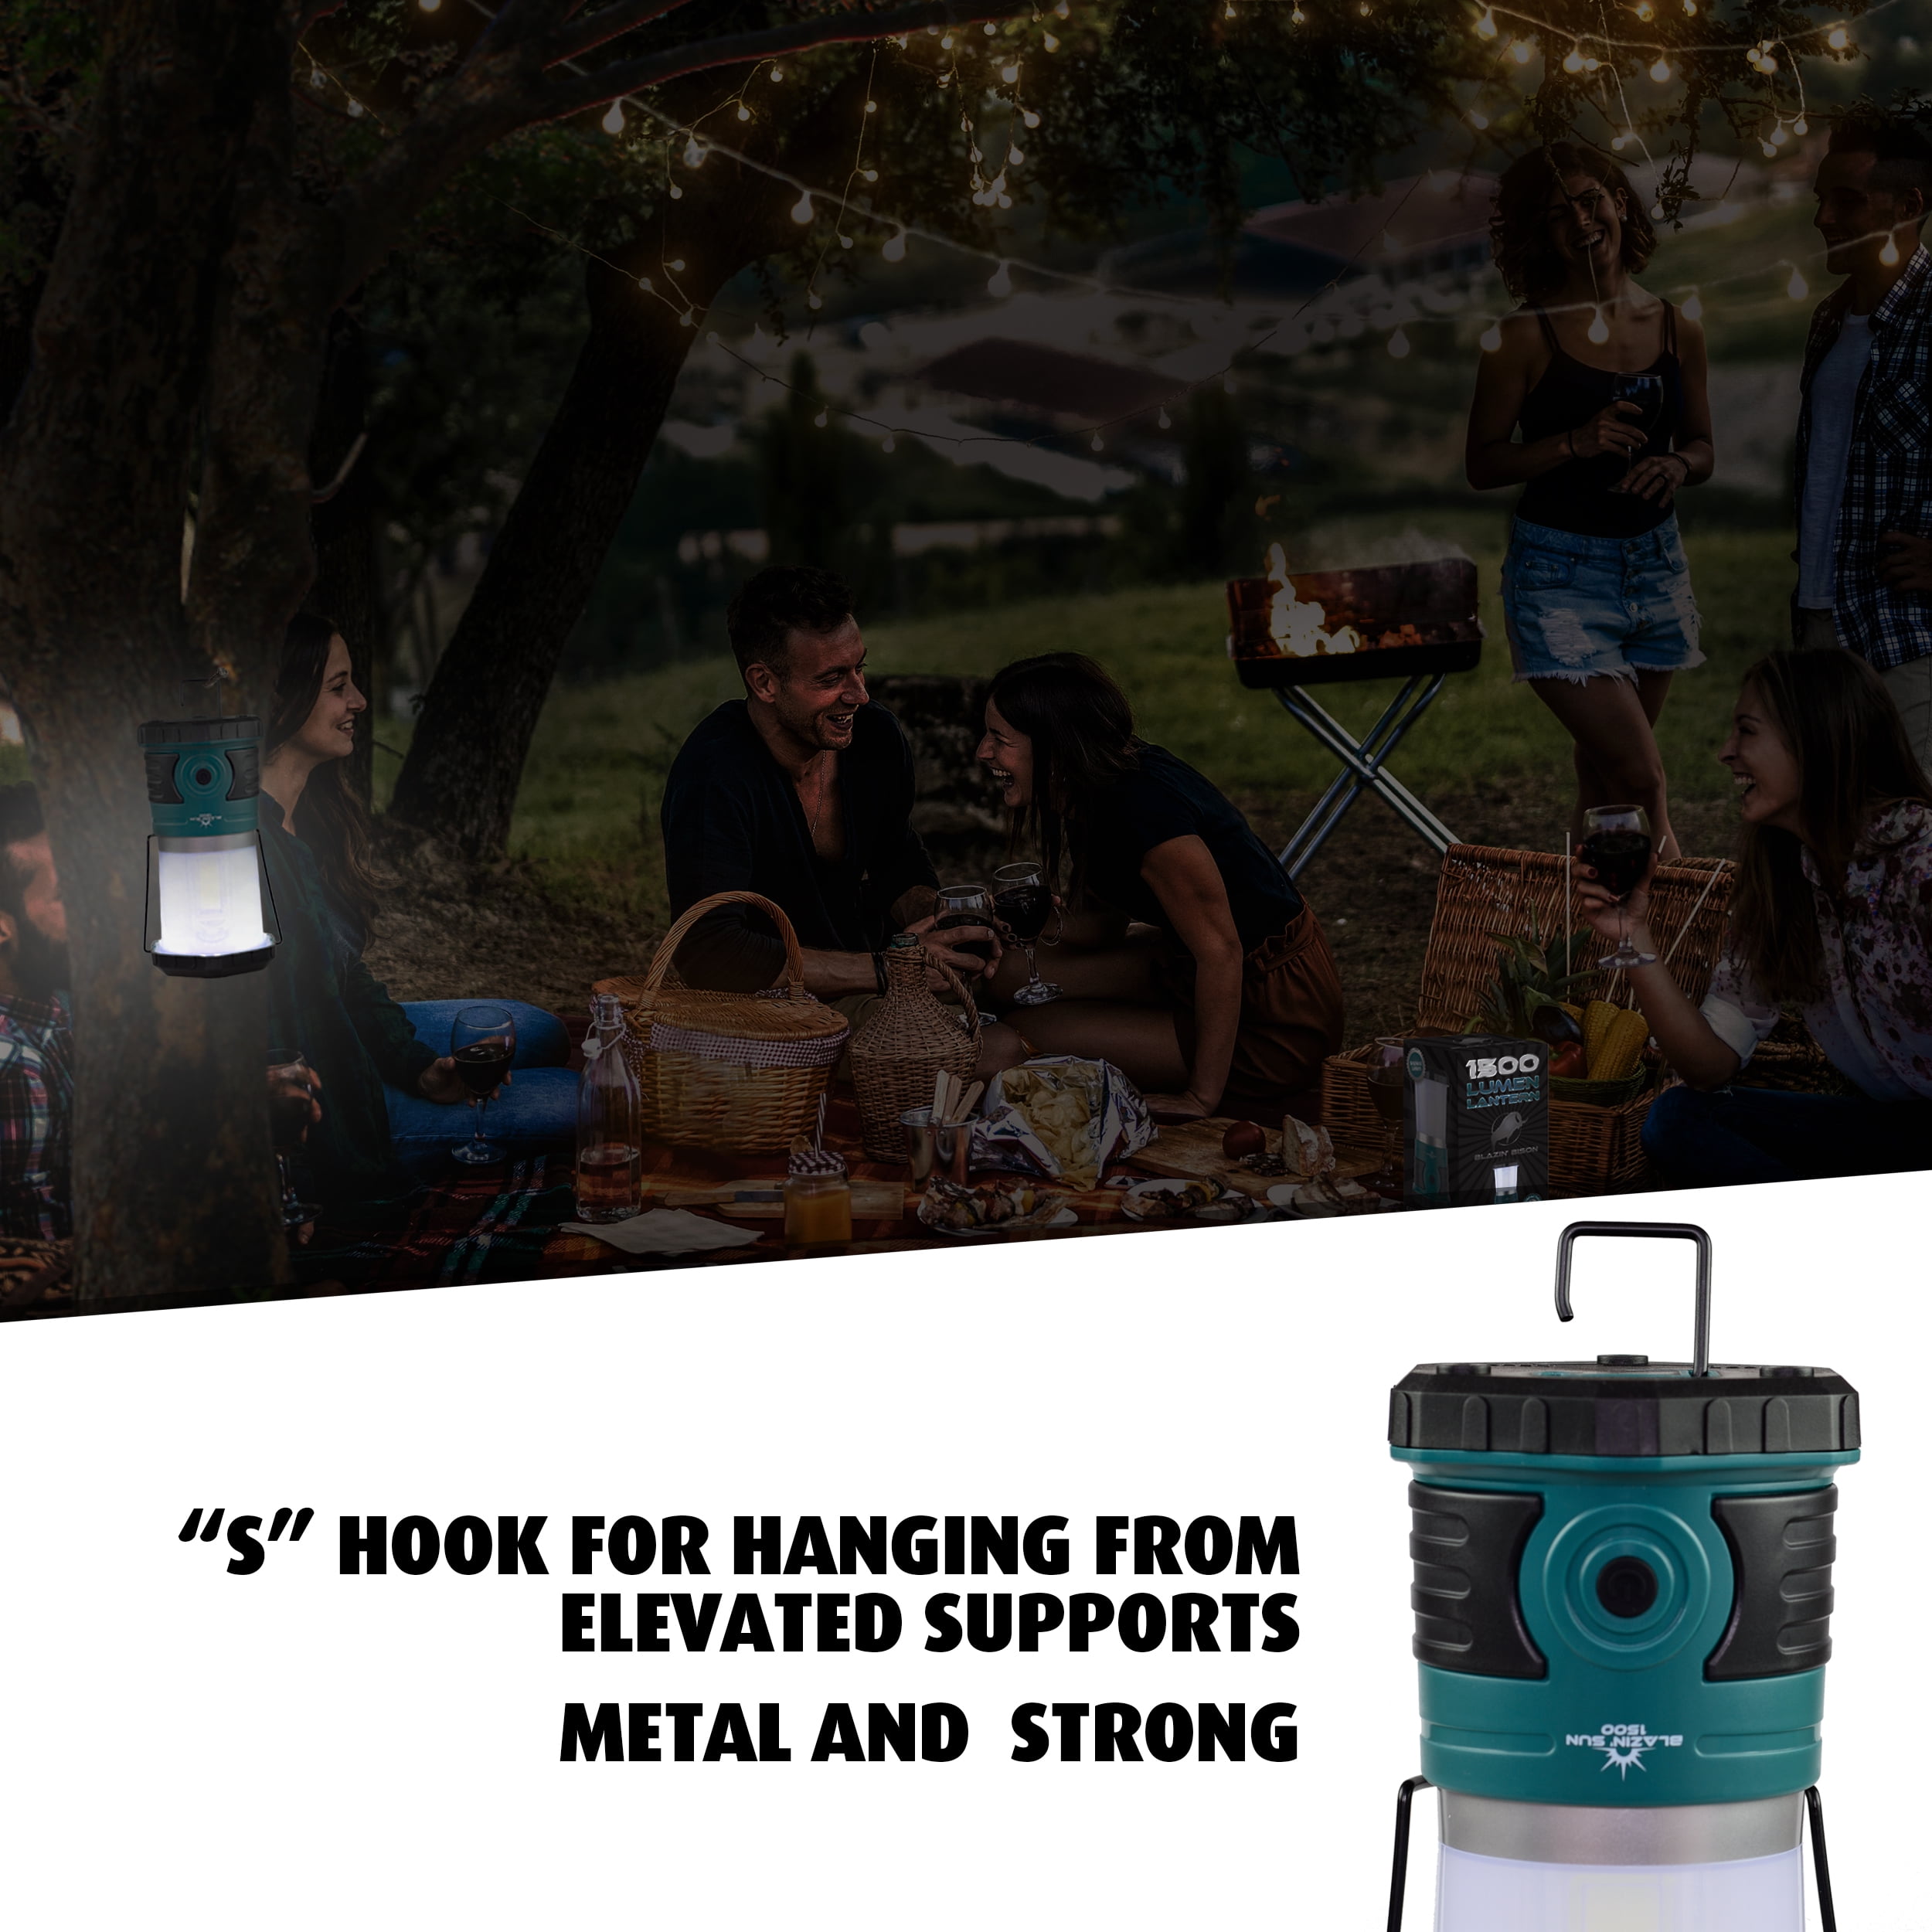 Blazin' Sun 1500 Lumen | Led Lanterns Battery Operated | Hurricane,  Emergency, Storm, Power Outage Light | 200 Hour Runtime (Teal)